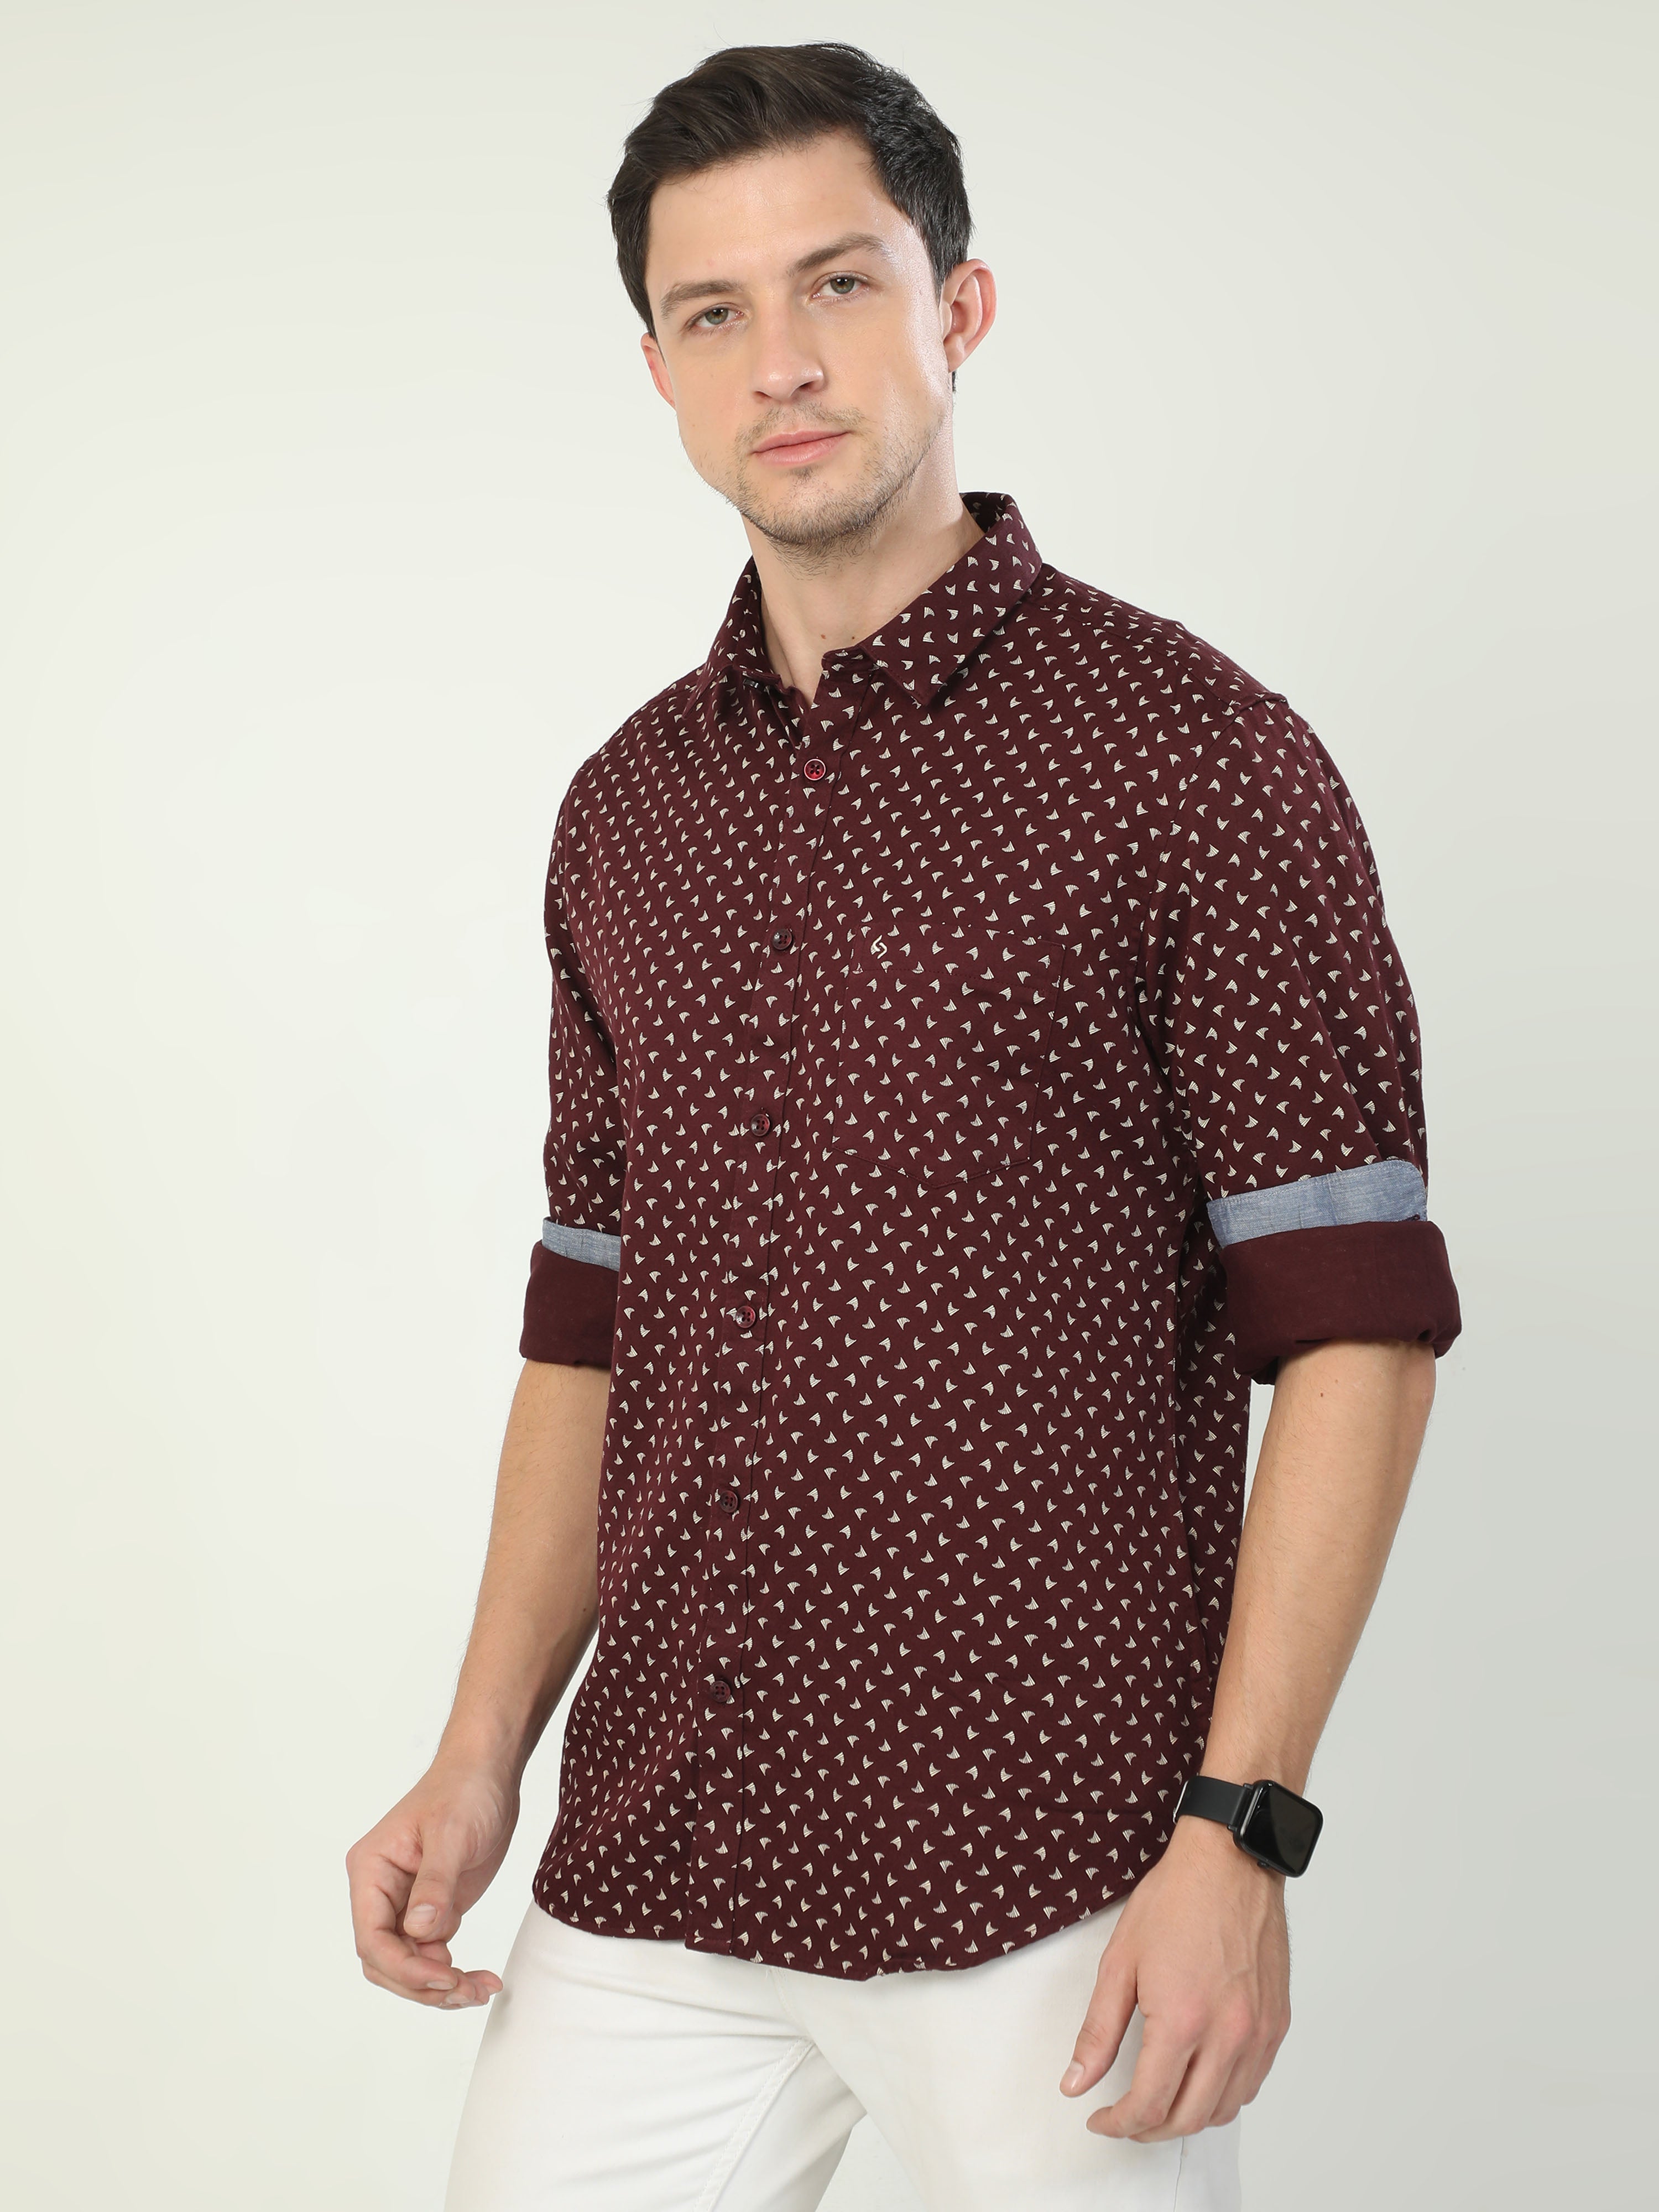 Classic Polo Men's Polo Neck Full Sleeve Slim Fit Cotton Woven Shirt | SO2-44 A-FS-PRT-SF